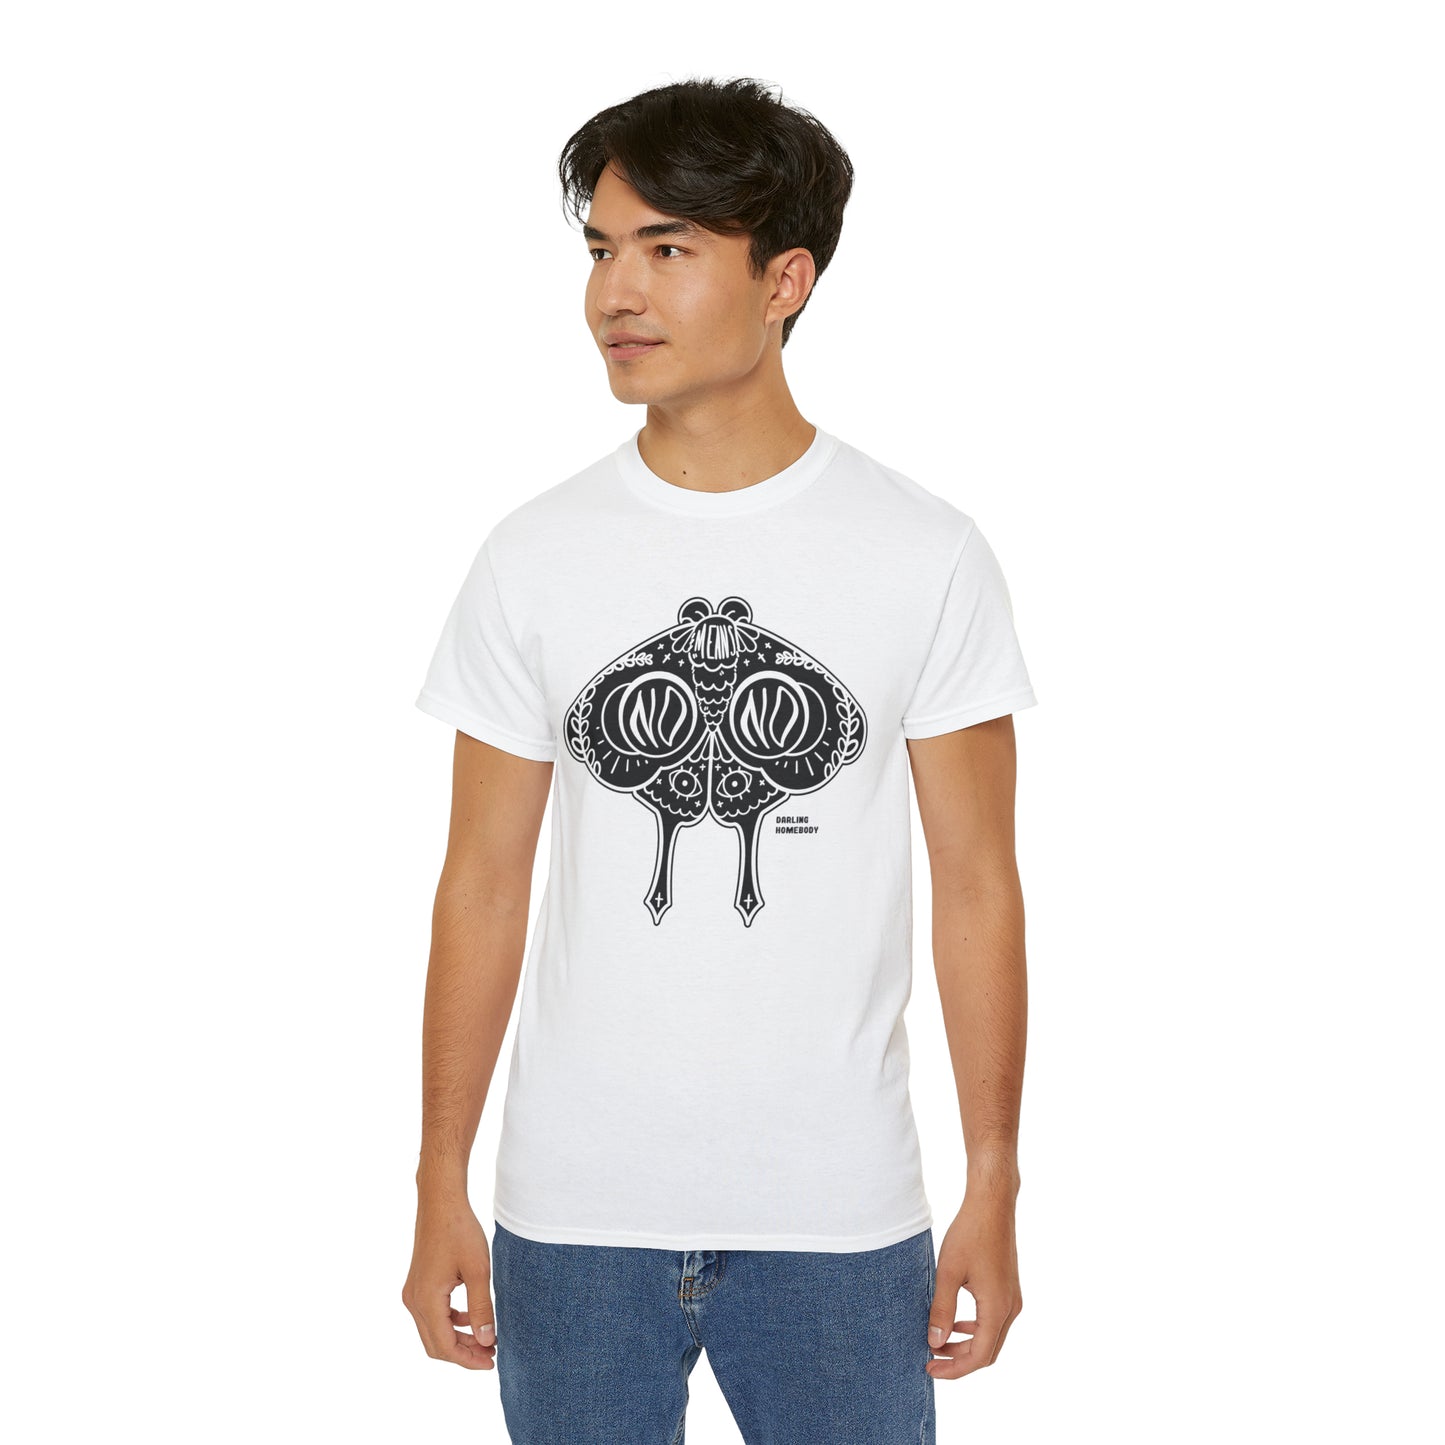 Moth No Means No Black on Light Unisex Ultra Cotton Tee